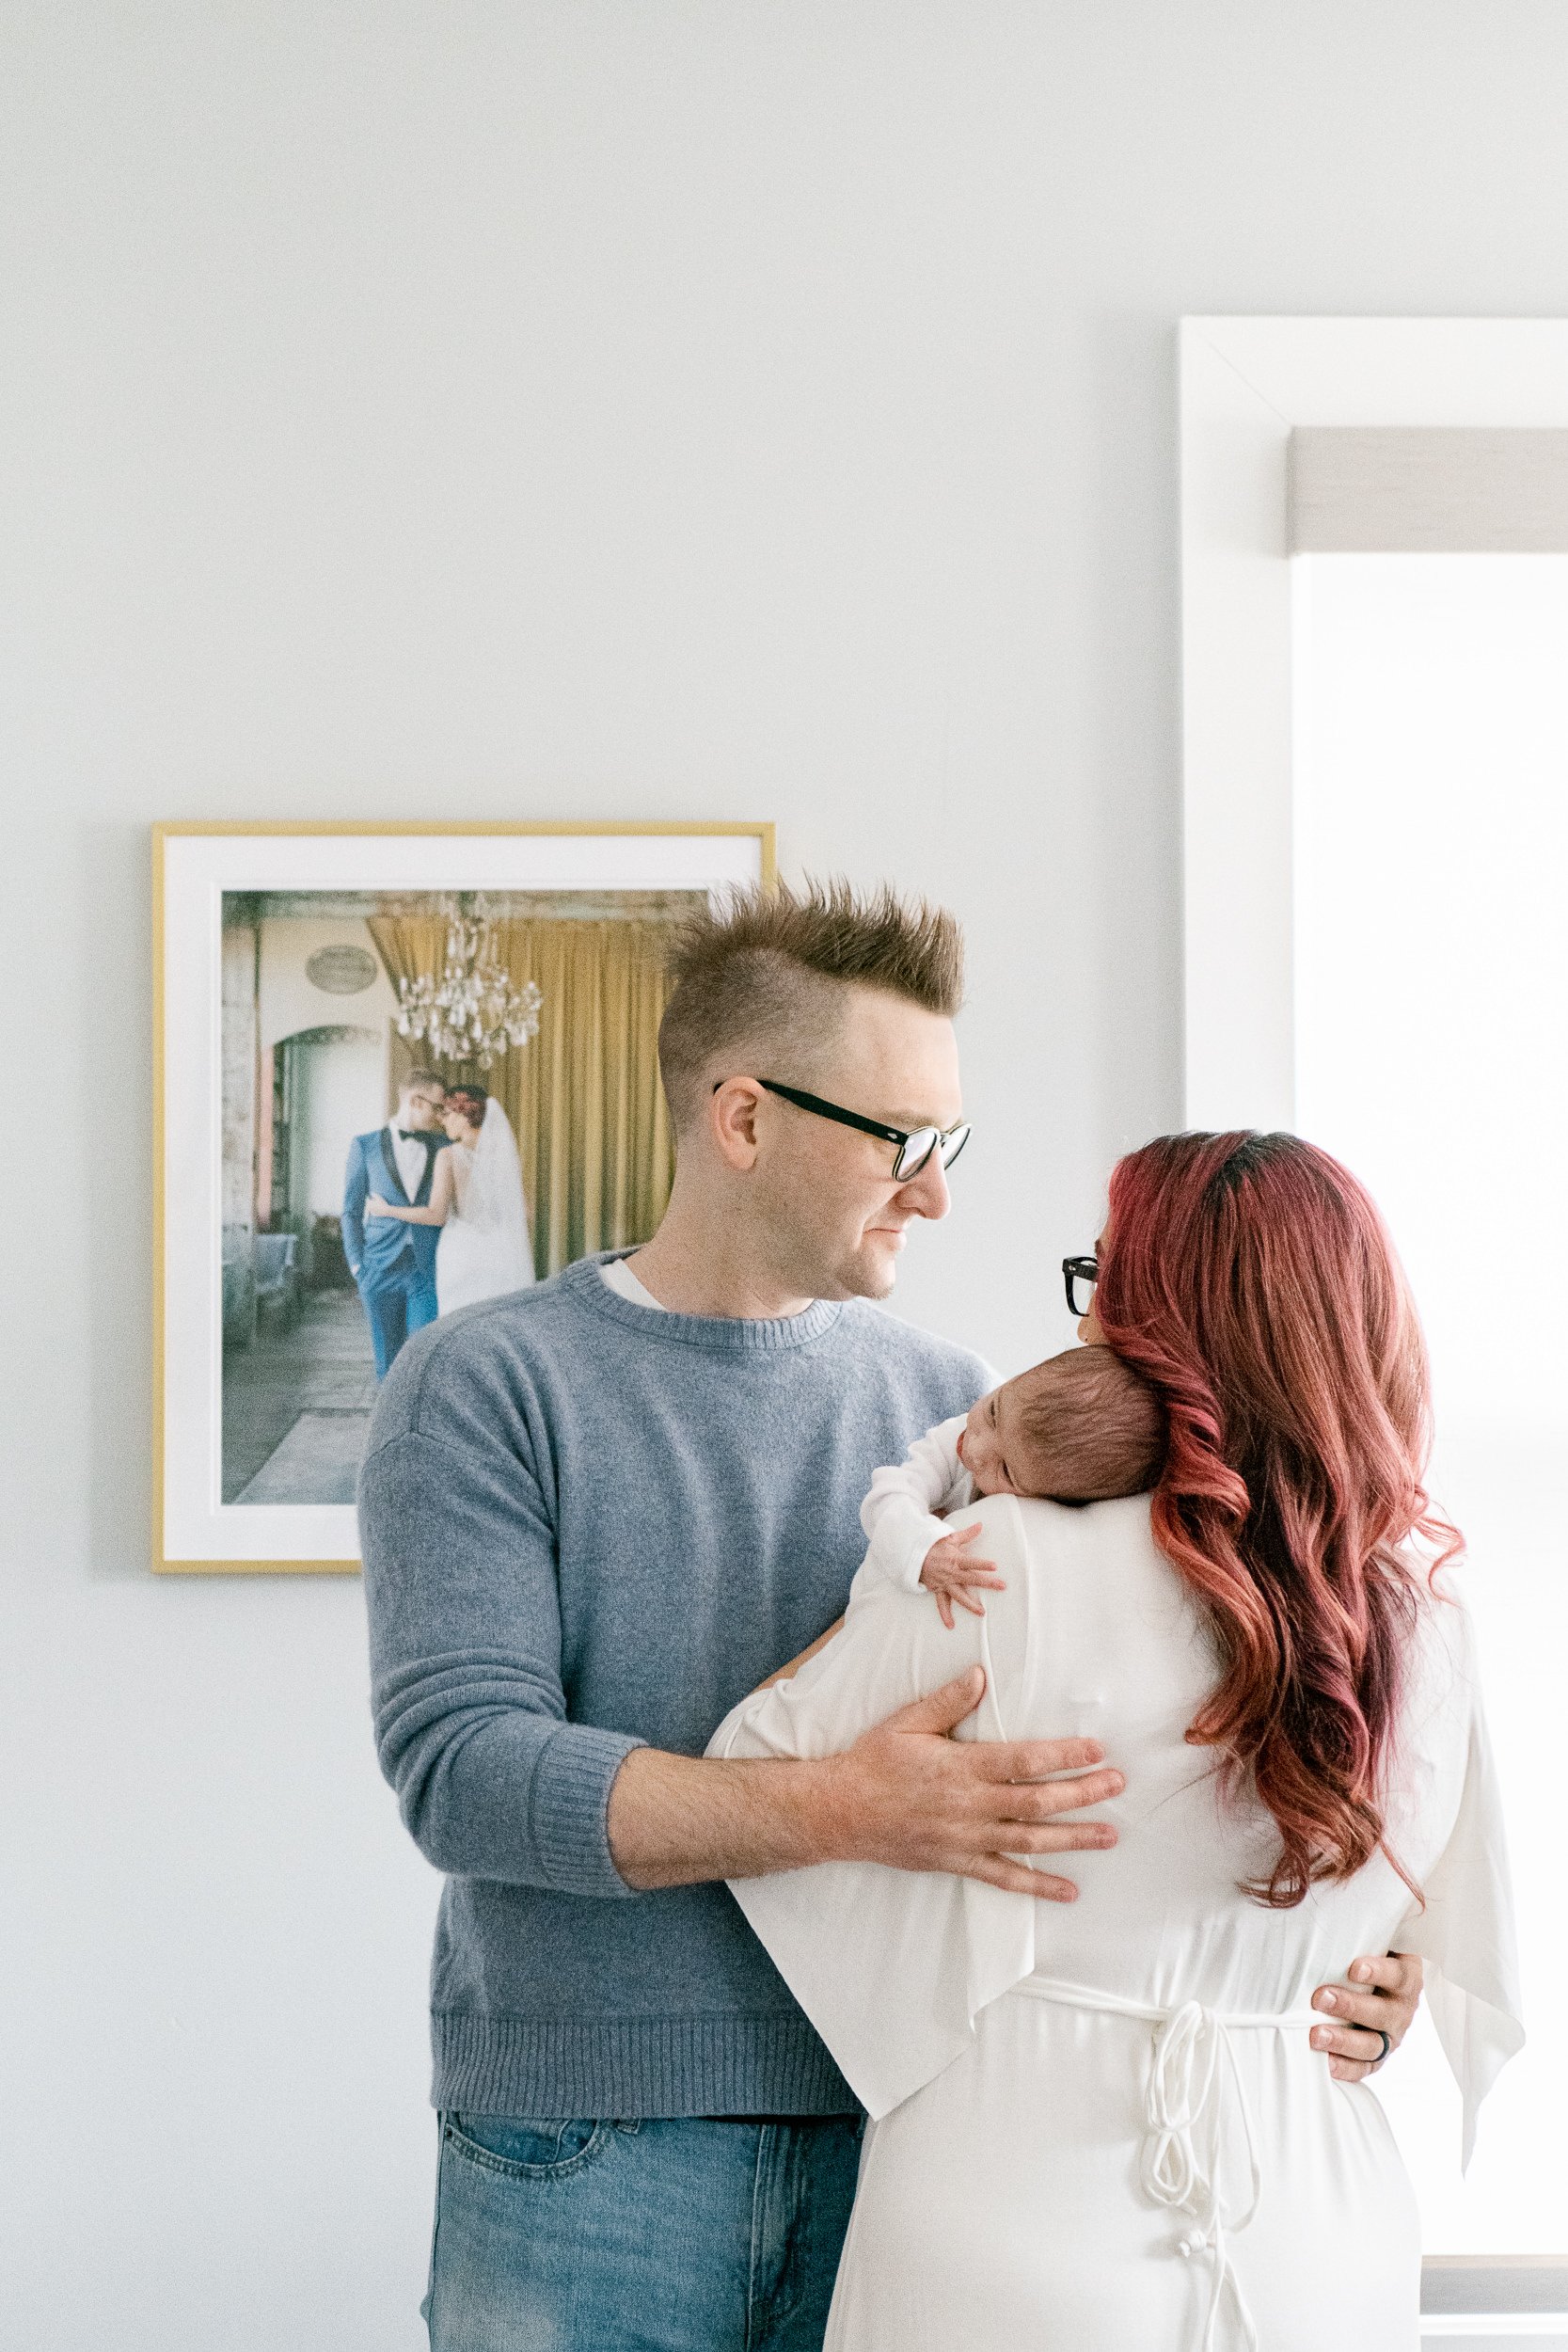  Portrait of new parents and baby standing next to wedding portrait by Nicole Hawkins Photography. time change portrait #NicoleHawkinsPhotography #NicoleHawkinsFamily #Newborns #InHomeNewborns #NicoleHawkinsNewborns #NJnewborns #babygirl 